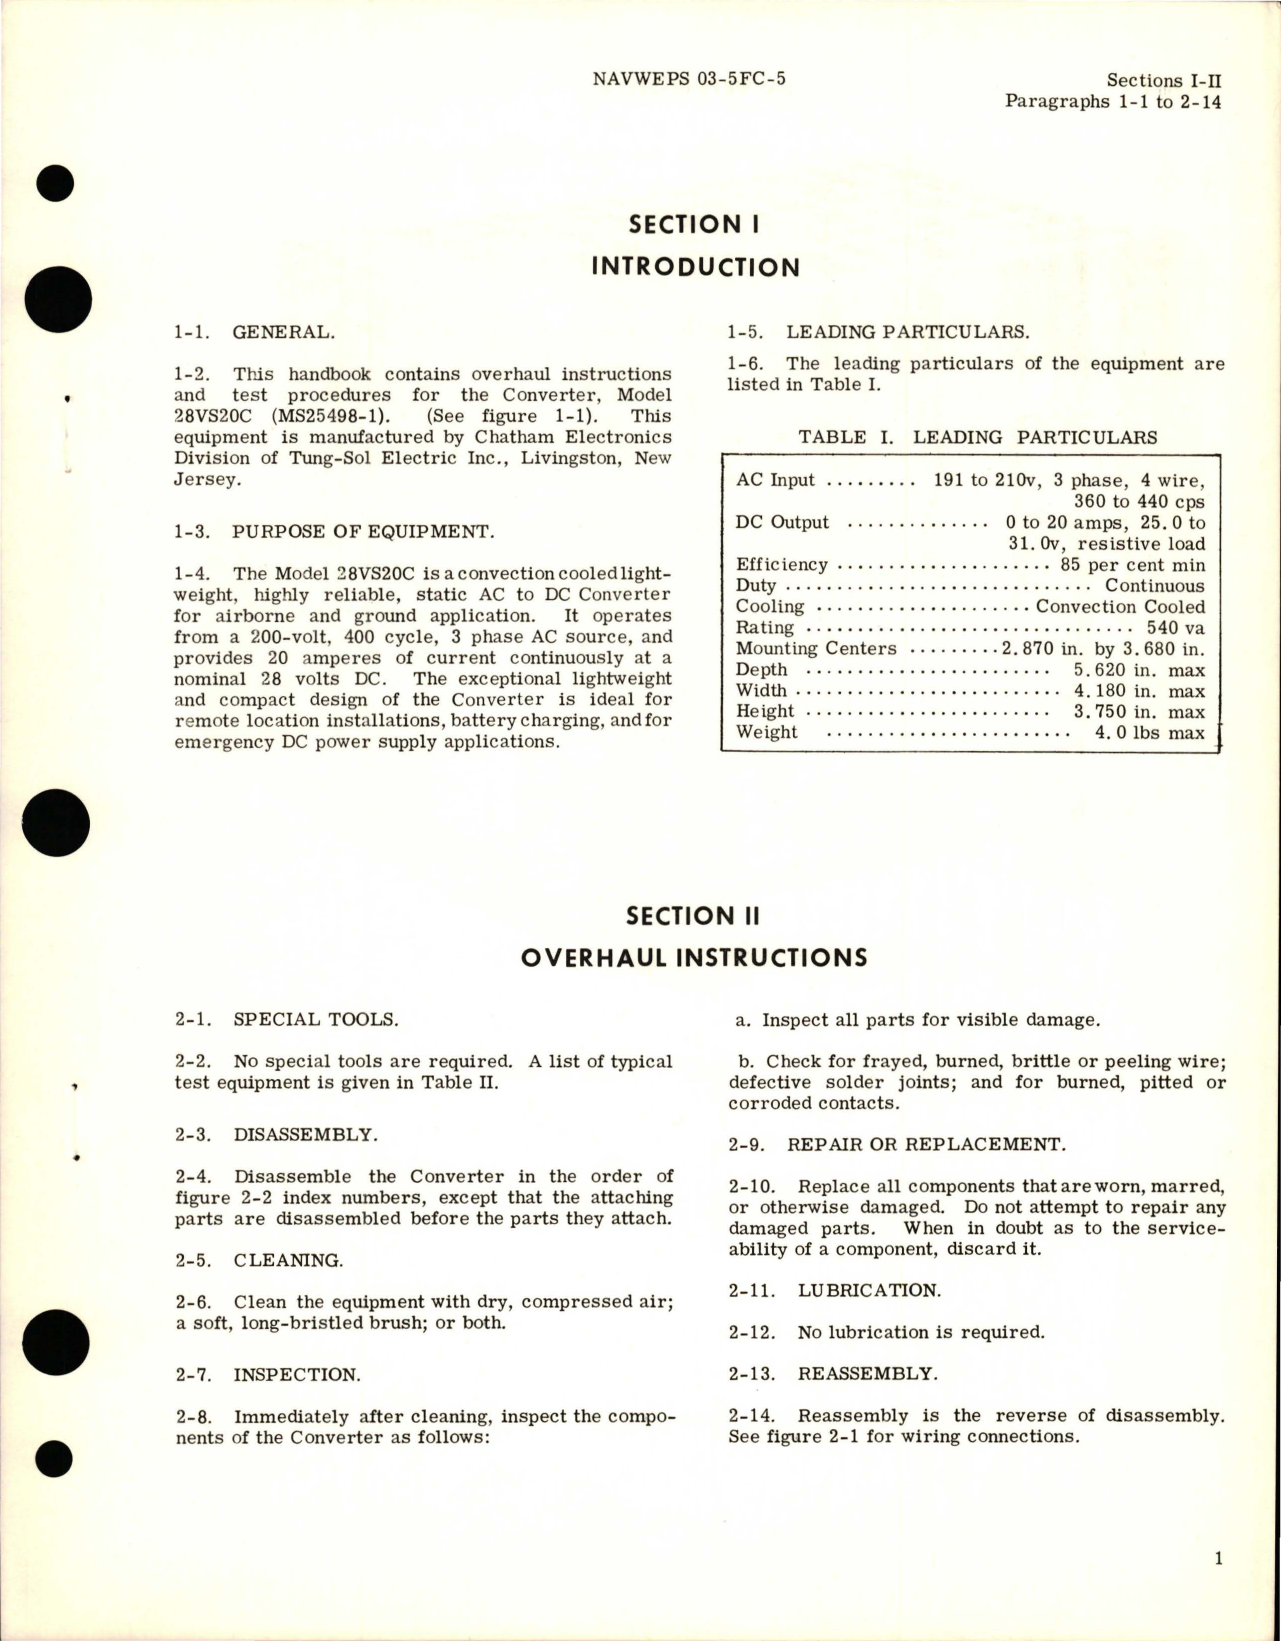 Sample page 5 from AirCorps Library document: Overhaul Instructions for Class B 20 Amp Converter - Part 28VS20C - Type MS25498-1